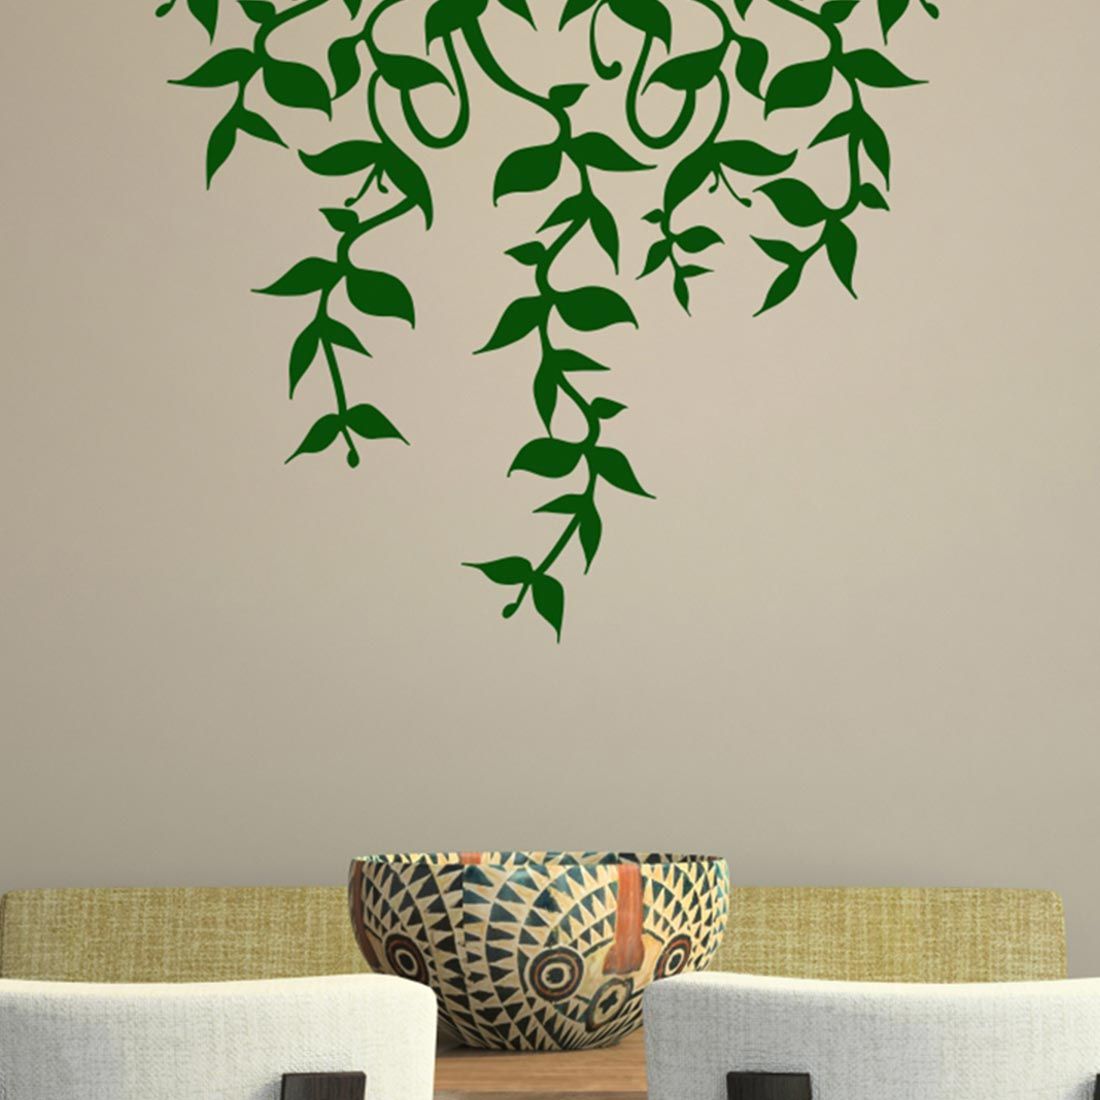 Green Creepers - Wall Stickers & Decals by Asian Paints